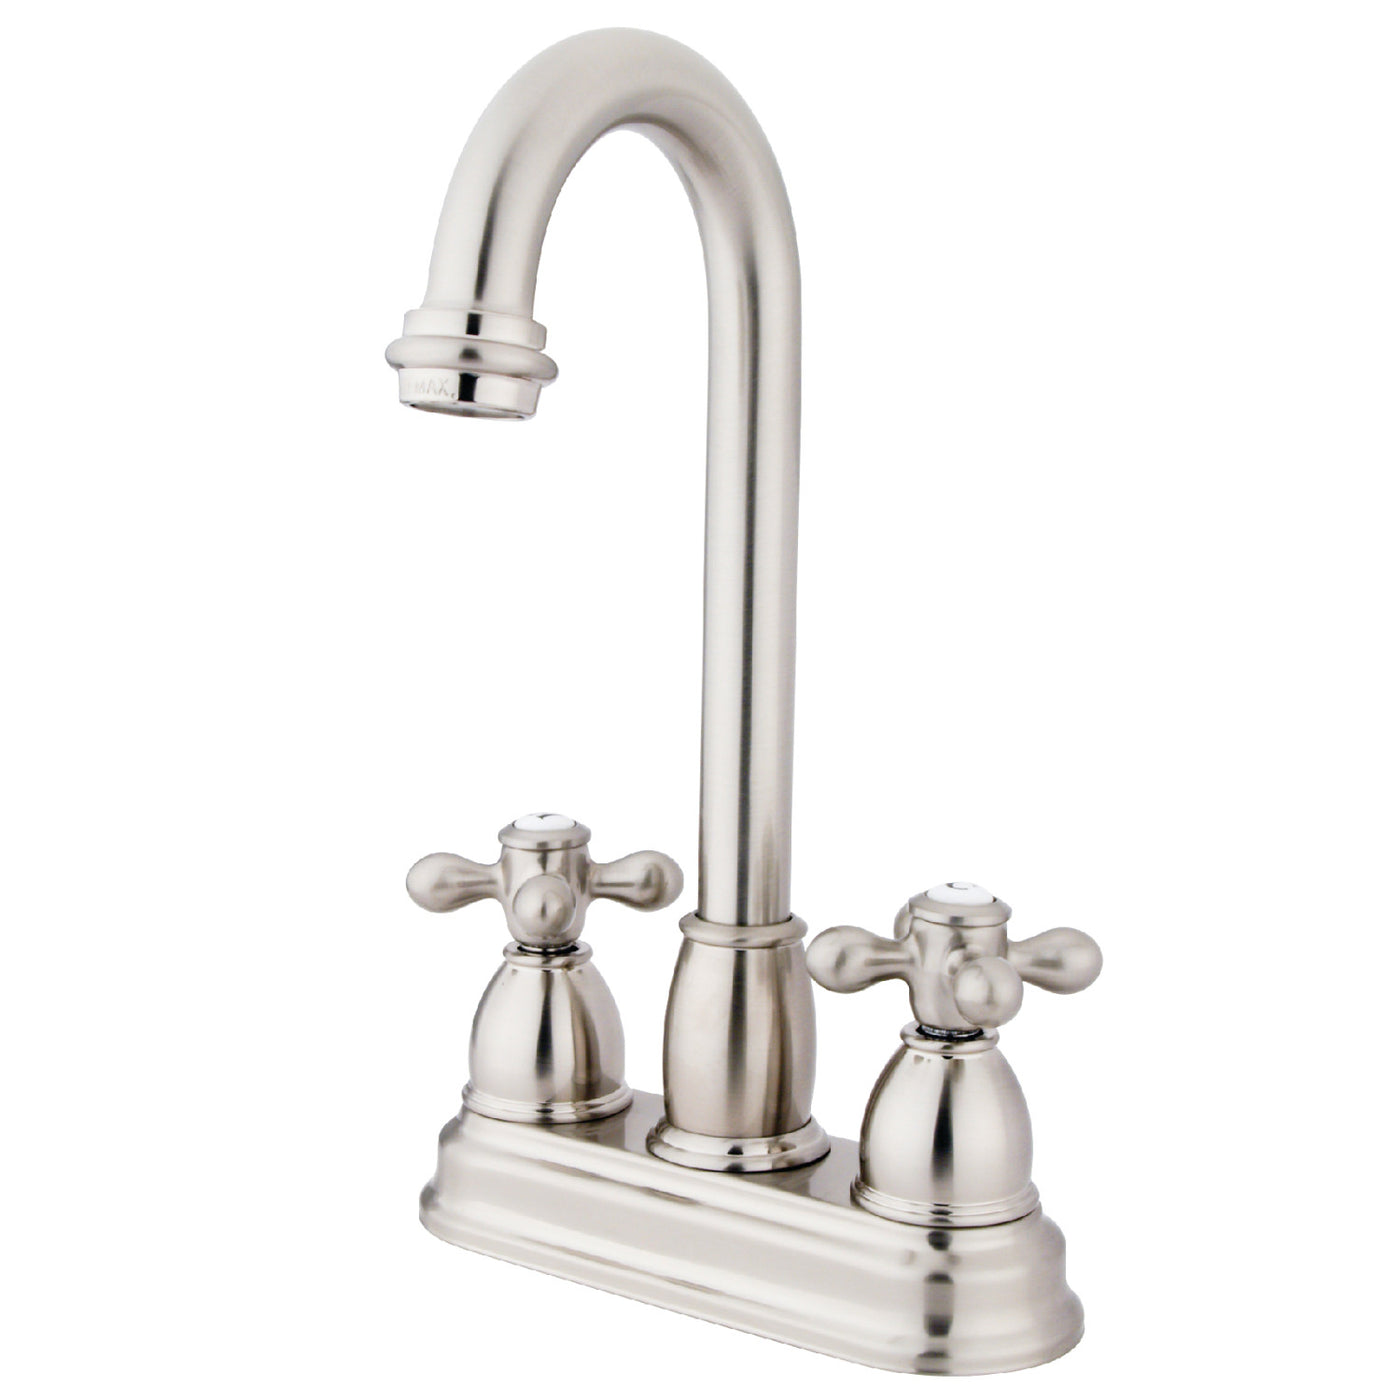 Elements of Design EB3498AX 4-Inch Centerset Bar Faucet, Brushed Nickel